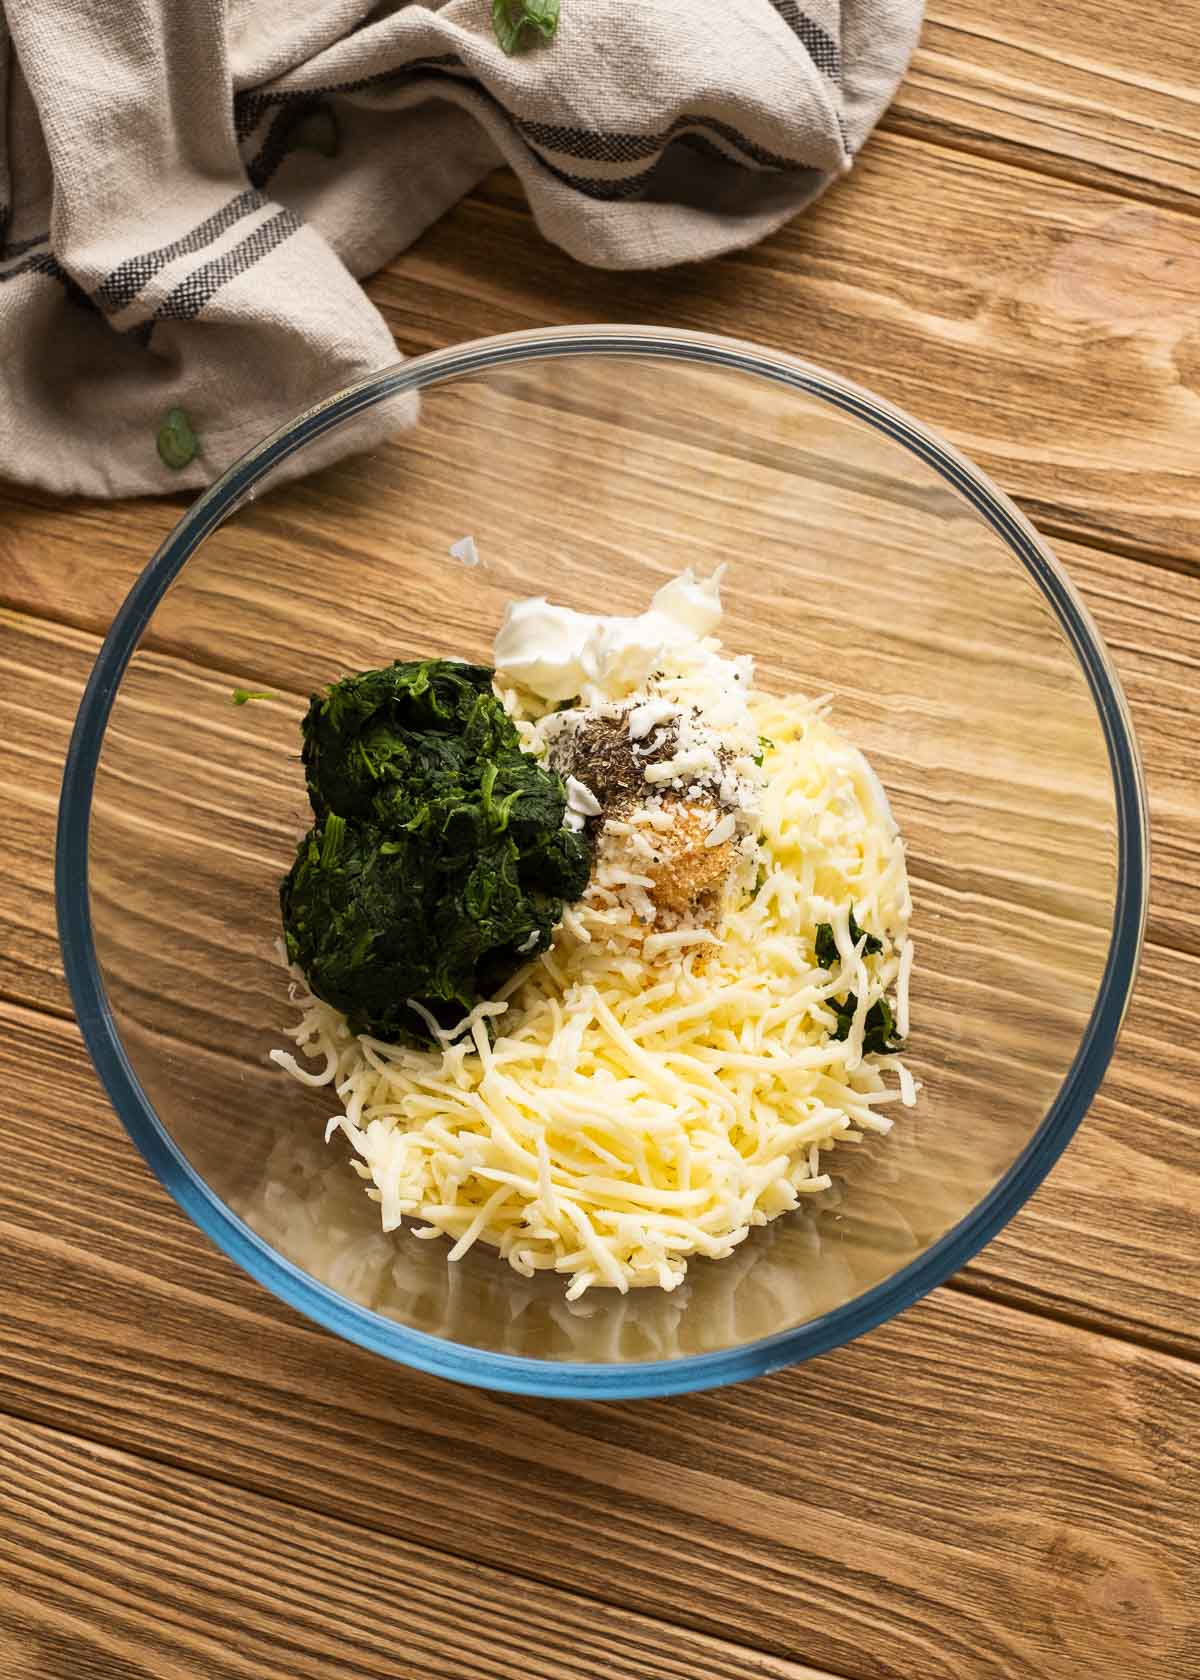 cream cheese, sour cream, shredded cheese, and spinach in a glass bowl